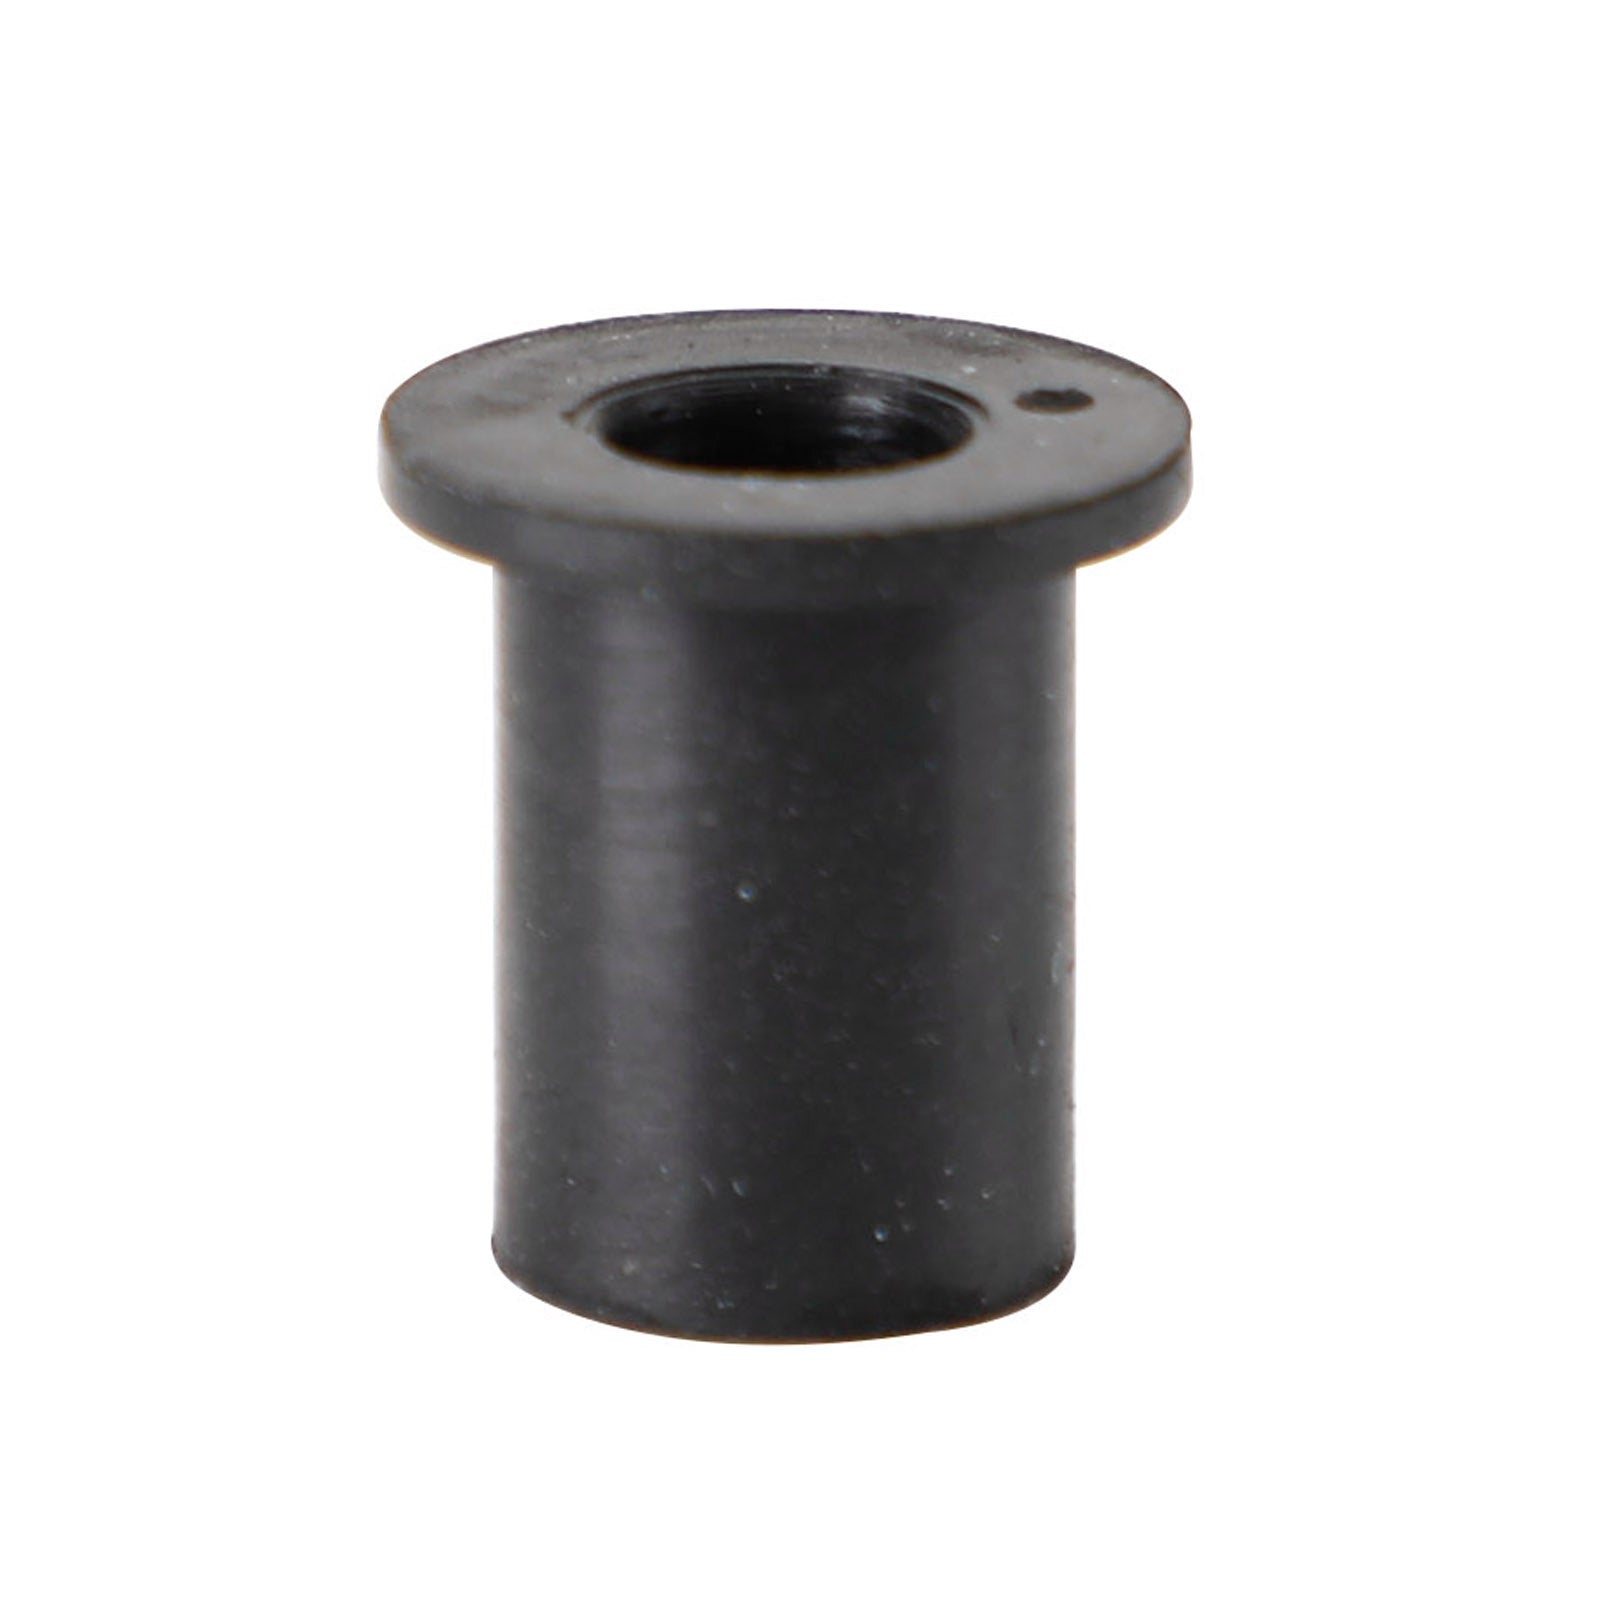 M5 Rubber Well Nuts Wellnuts for Fairing & Screen Fixing Pack of 100 - 10mm Hole